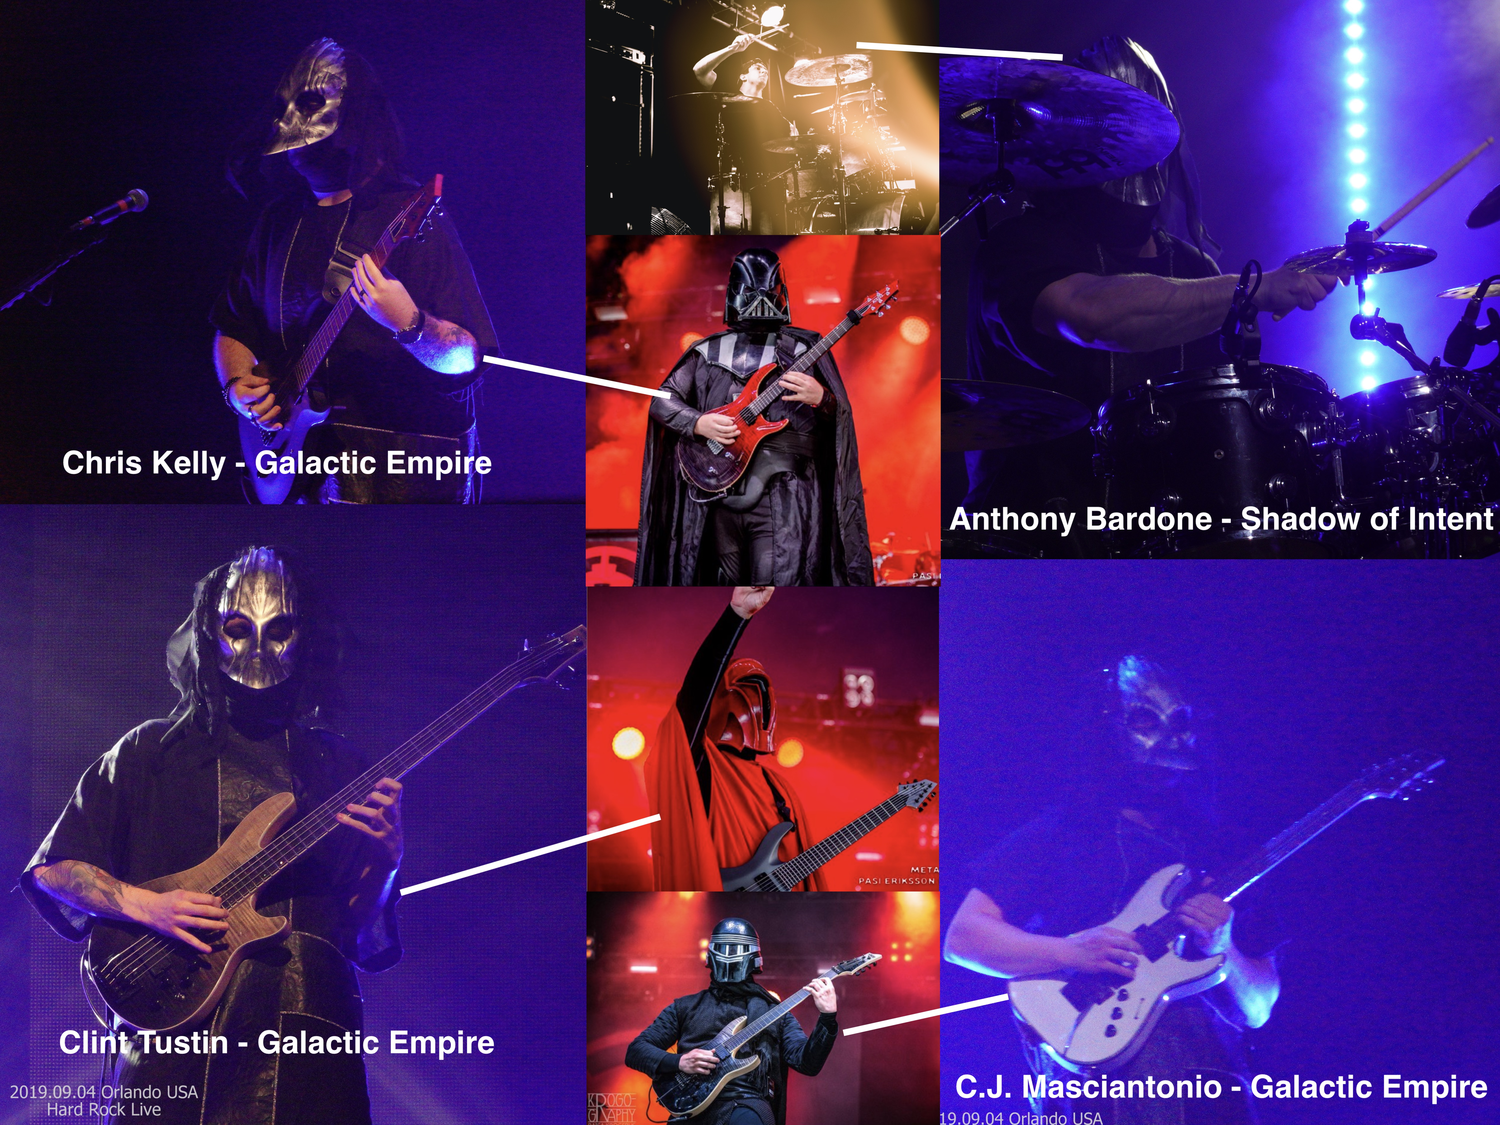 The 4 New Kami Band Members Identities Have Been Discovered